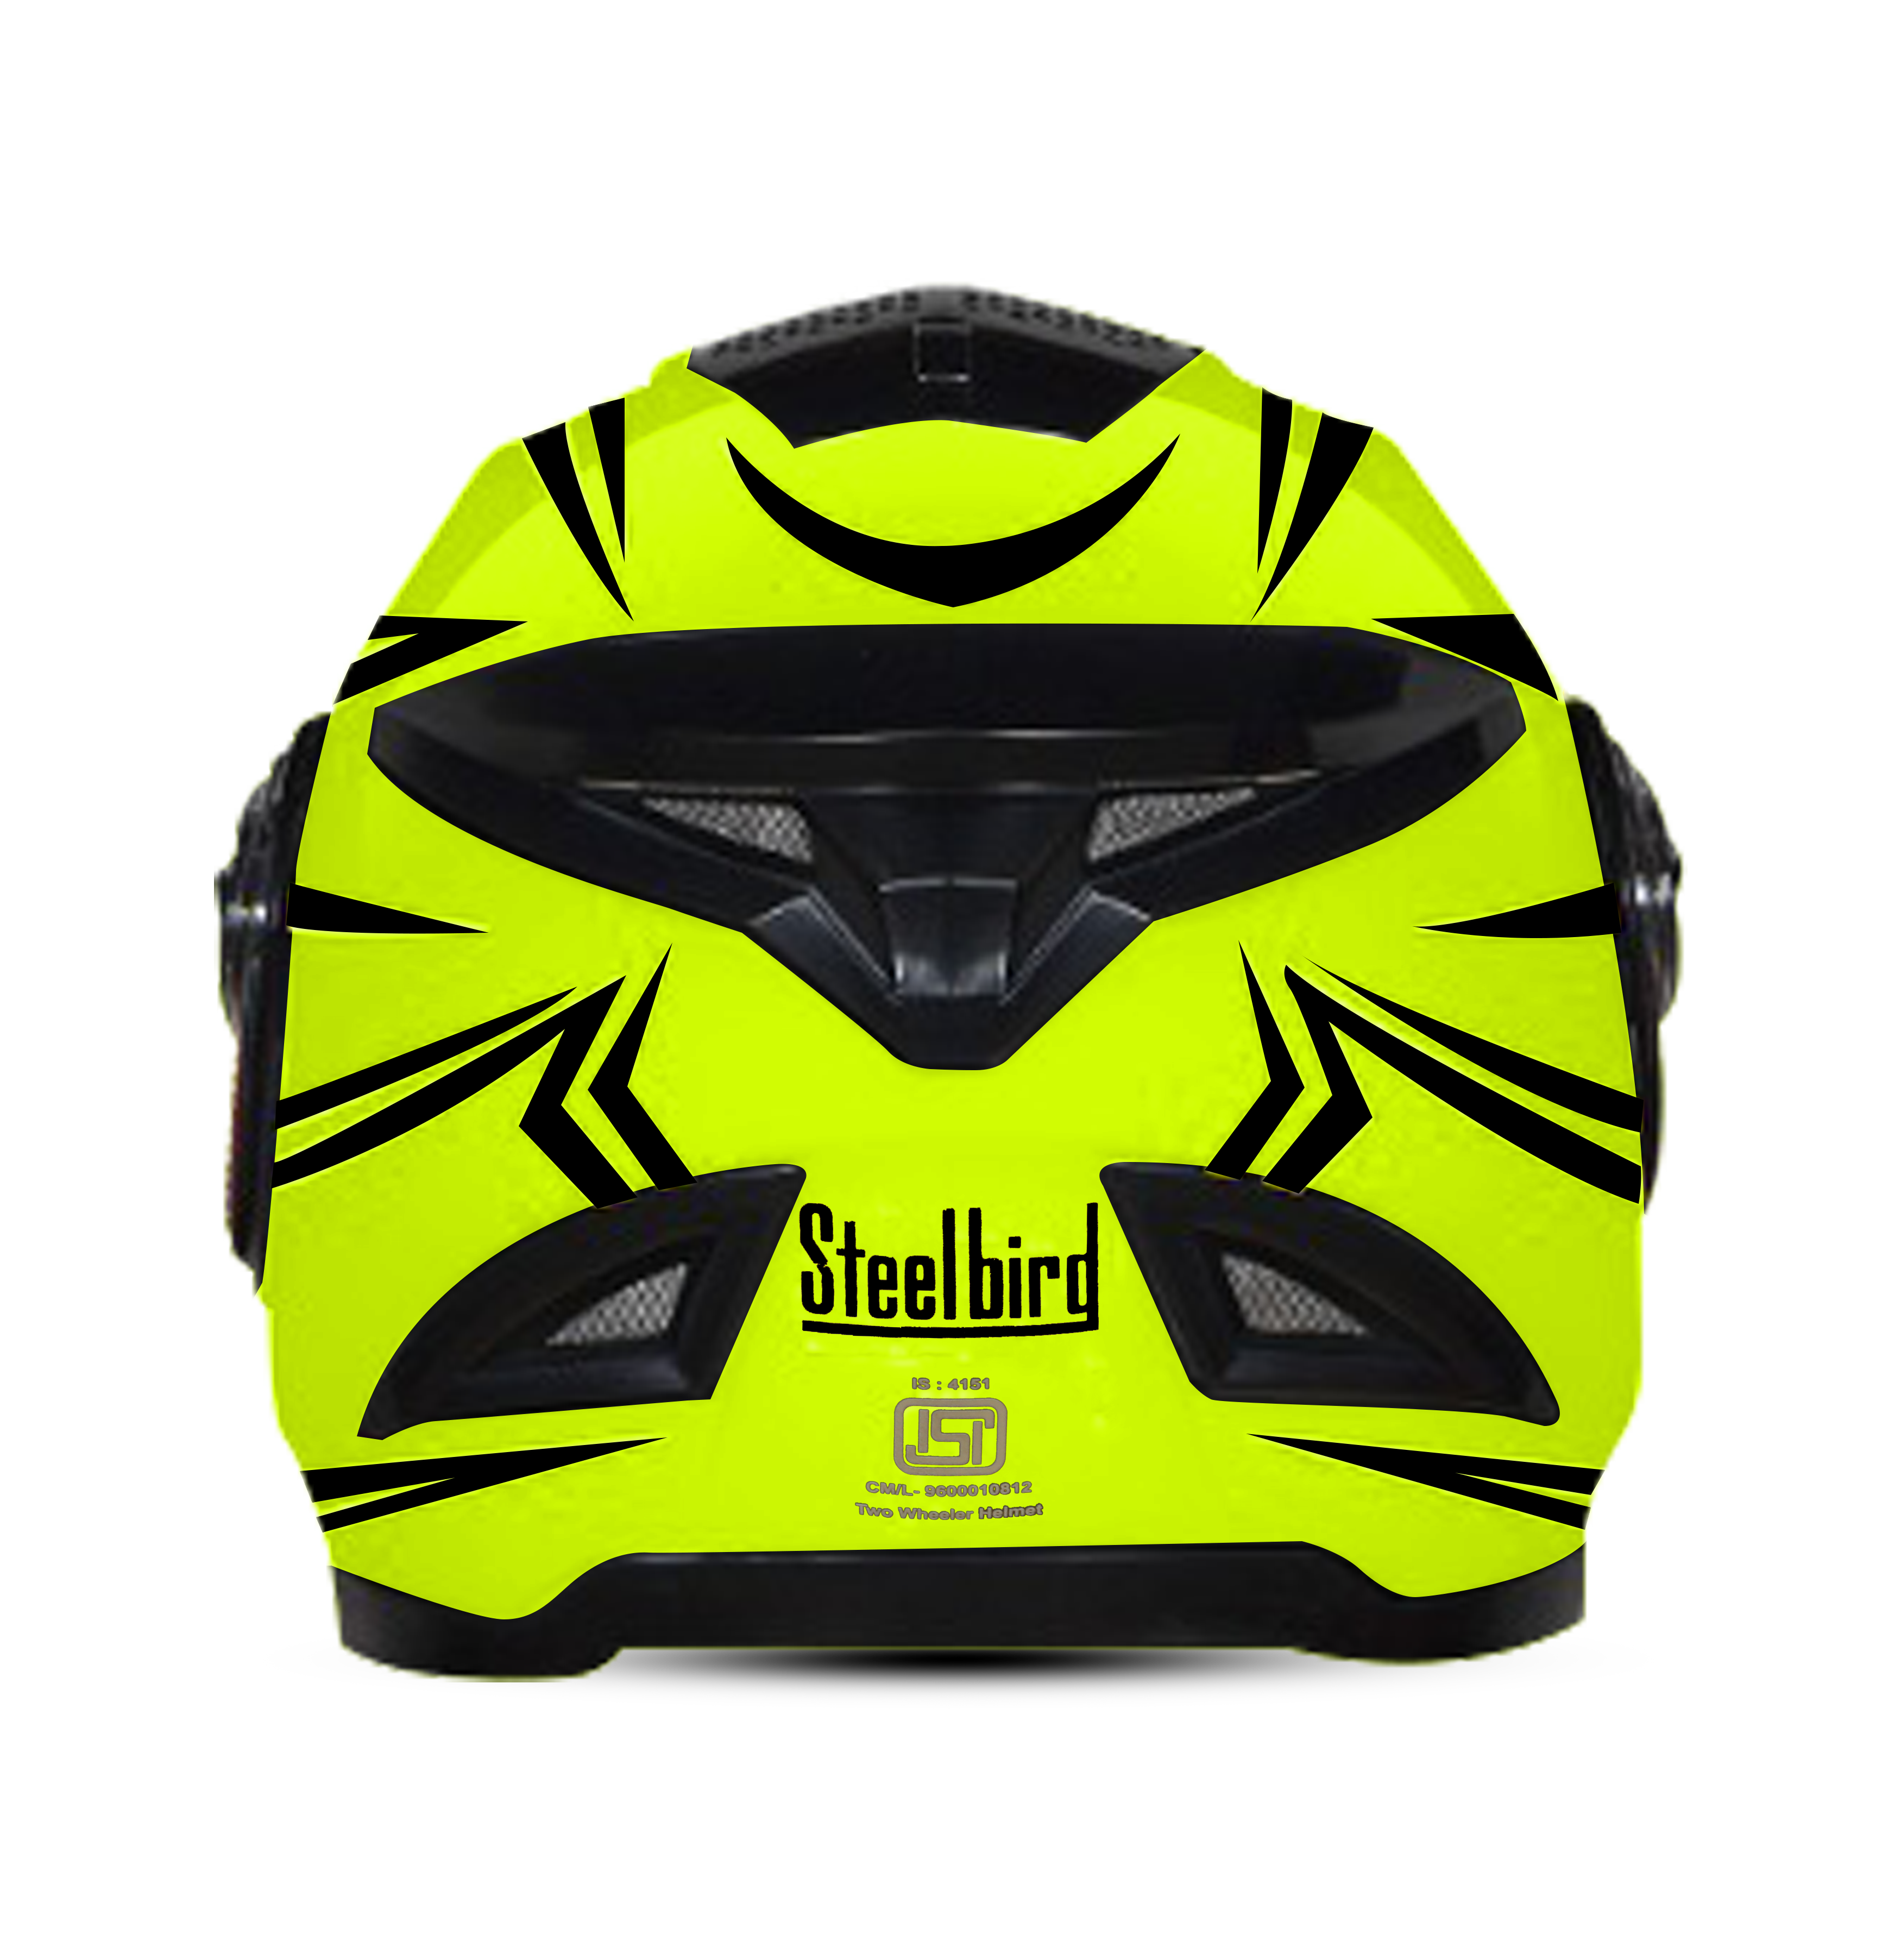 SBH-17 OPT REFLECTIVE GLOSSY FLUO NEON WITH BLACK (WITH ANTI-FOG SHIELD)